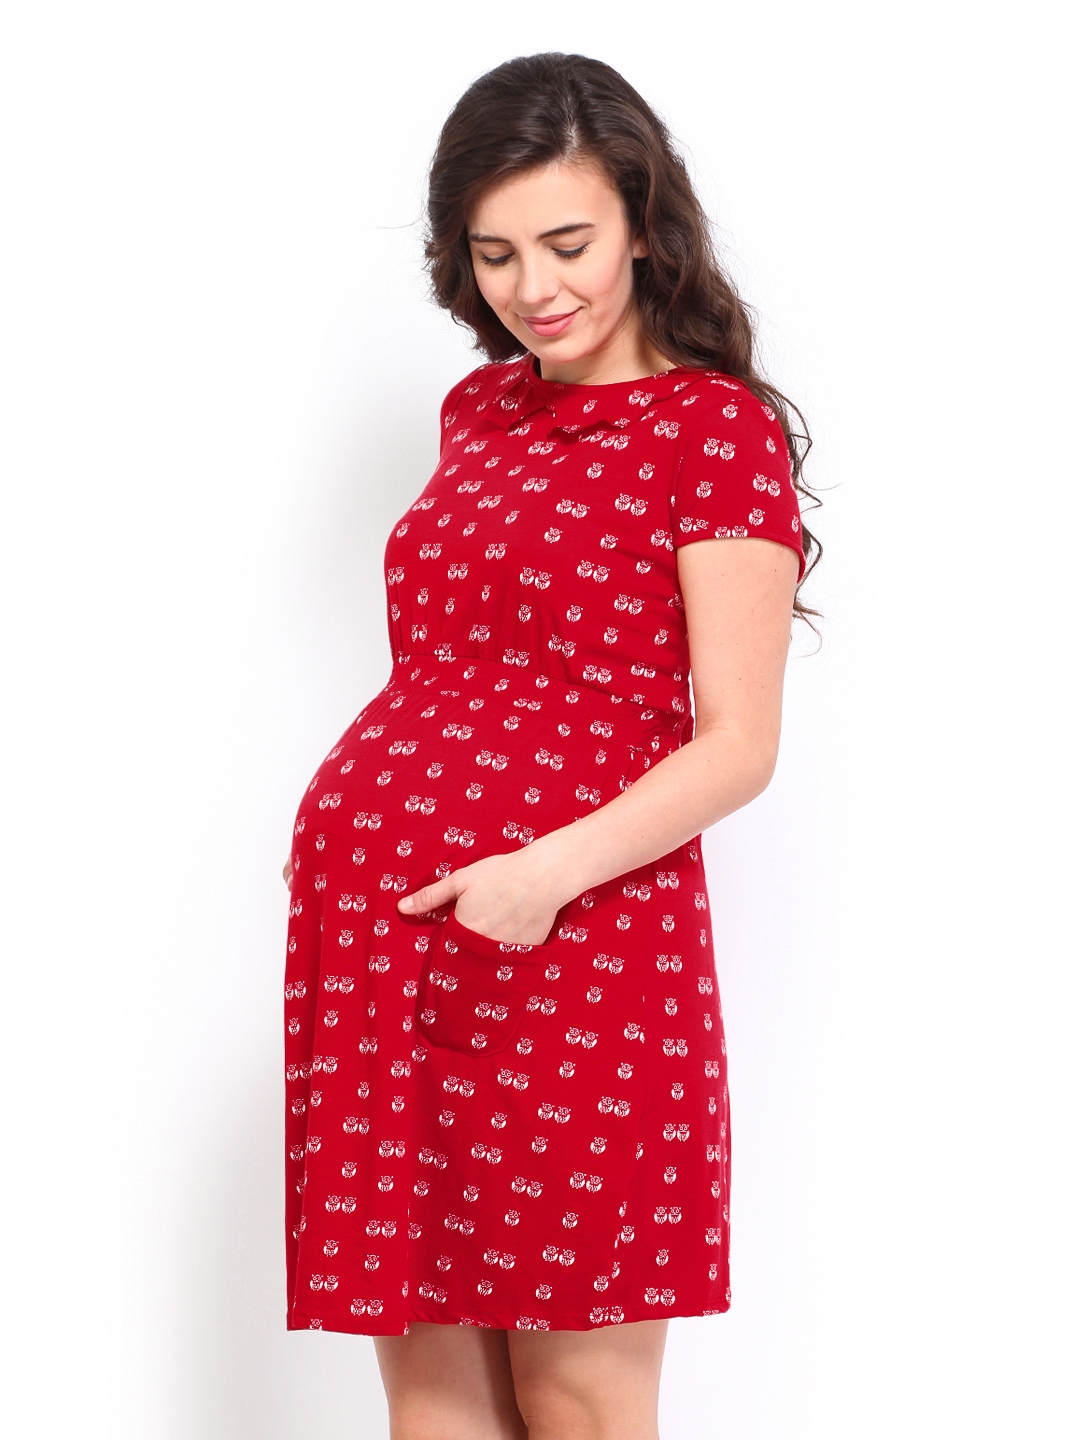 CLYMAA Woman Rayon Cotton Maternity GownMaternity wearFeeding gown S